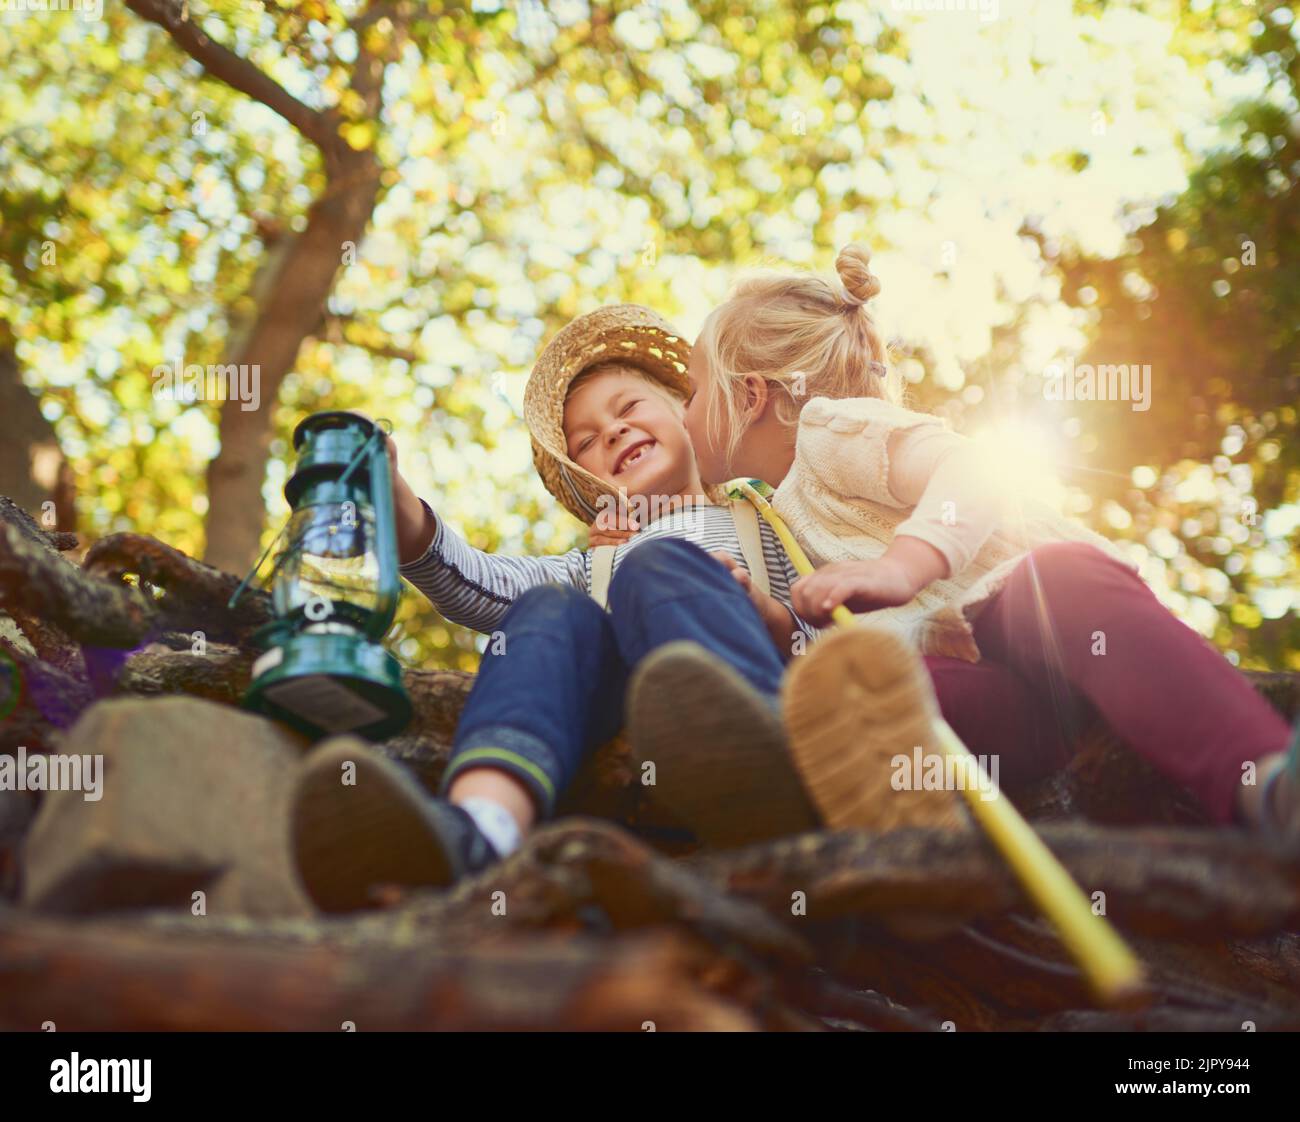 Sharing some sibling love. two little children playing together outdoors. Stock Photo